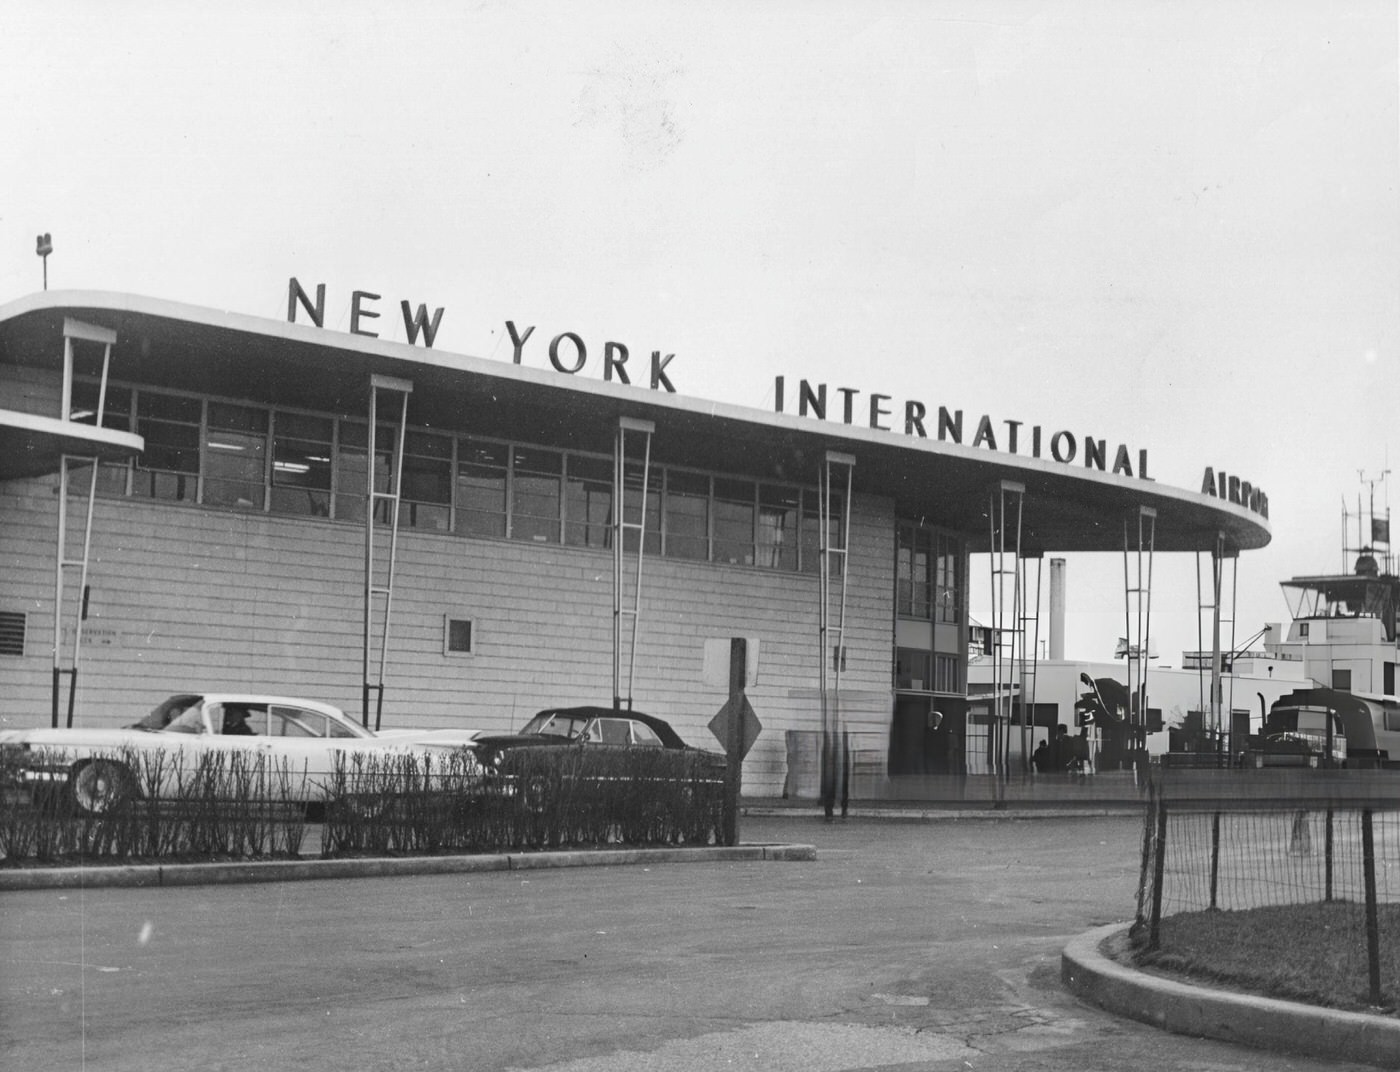 The New York International Building At Idlewild Airport In Jamaica, New York, 1960.